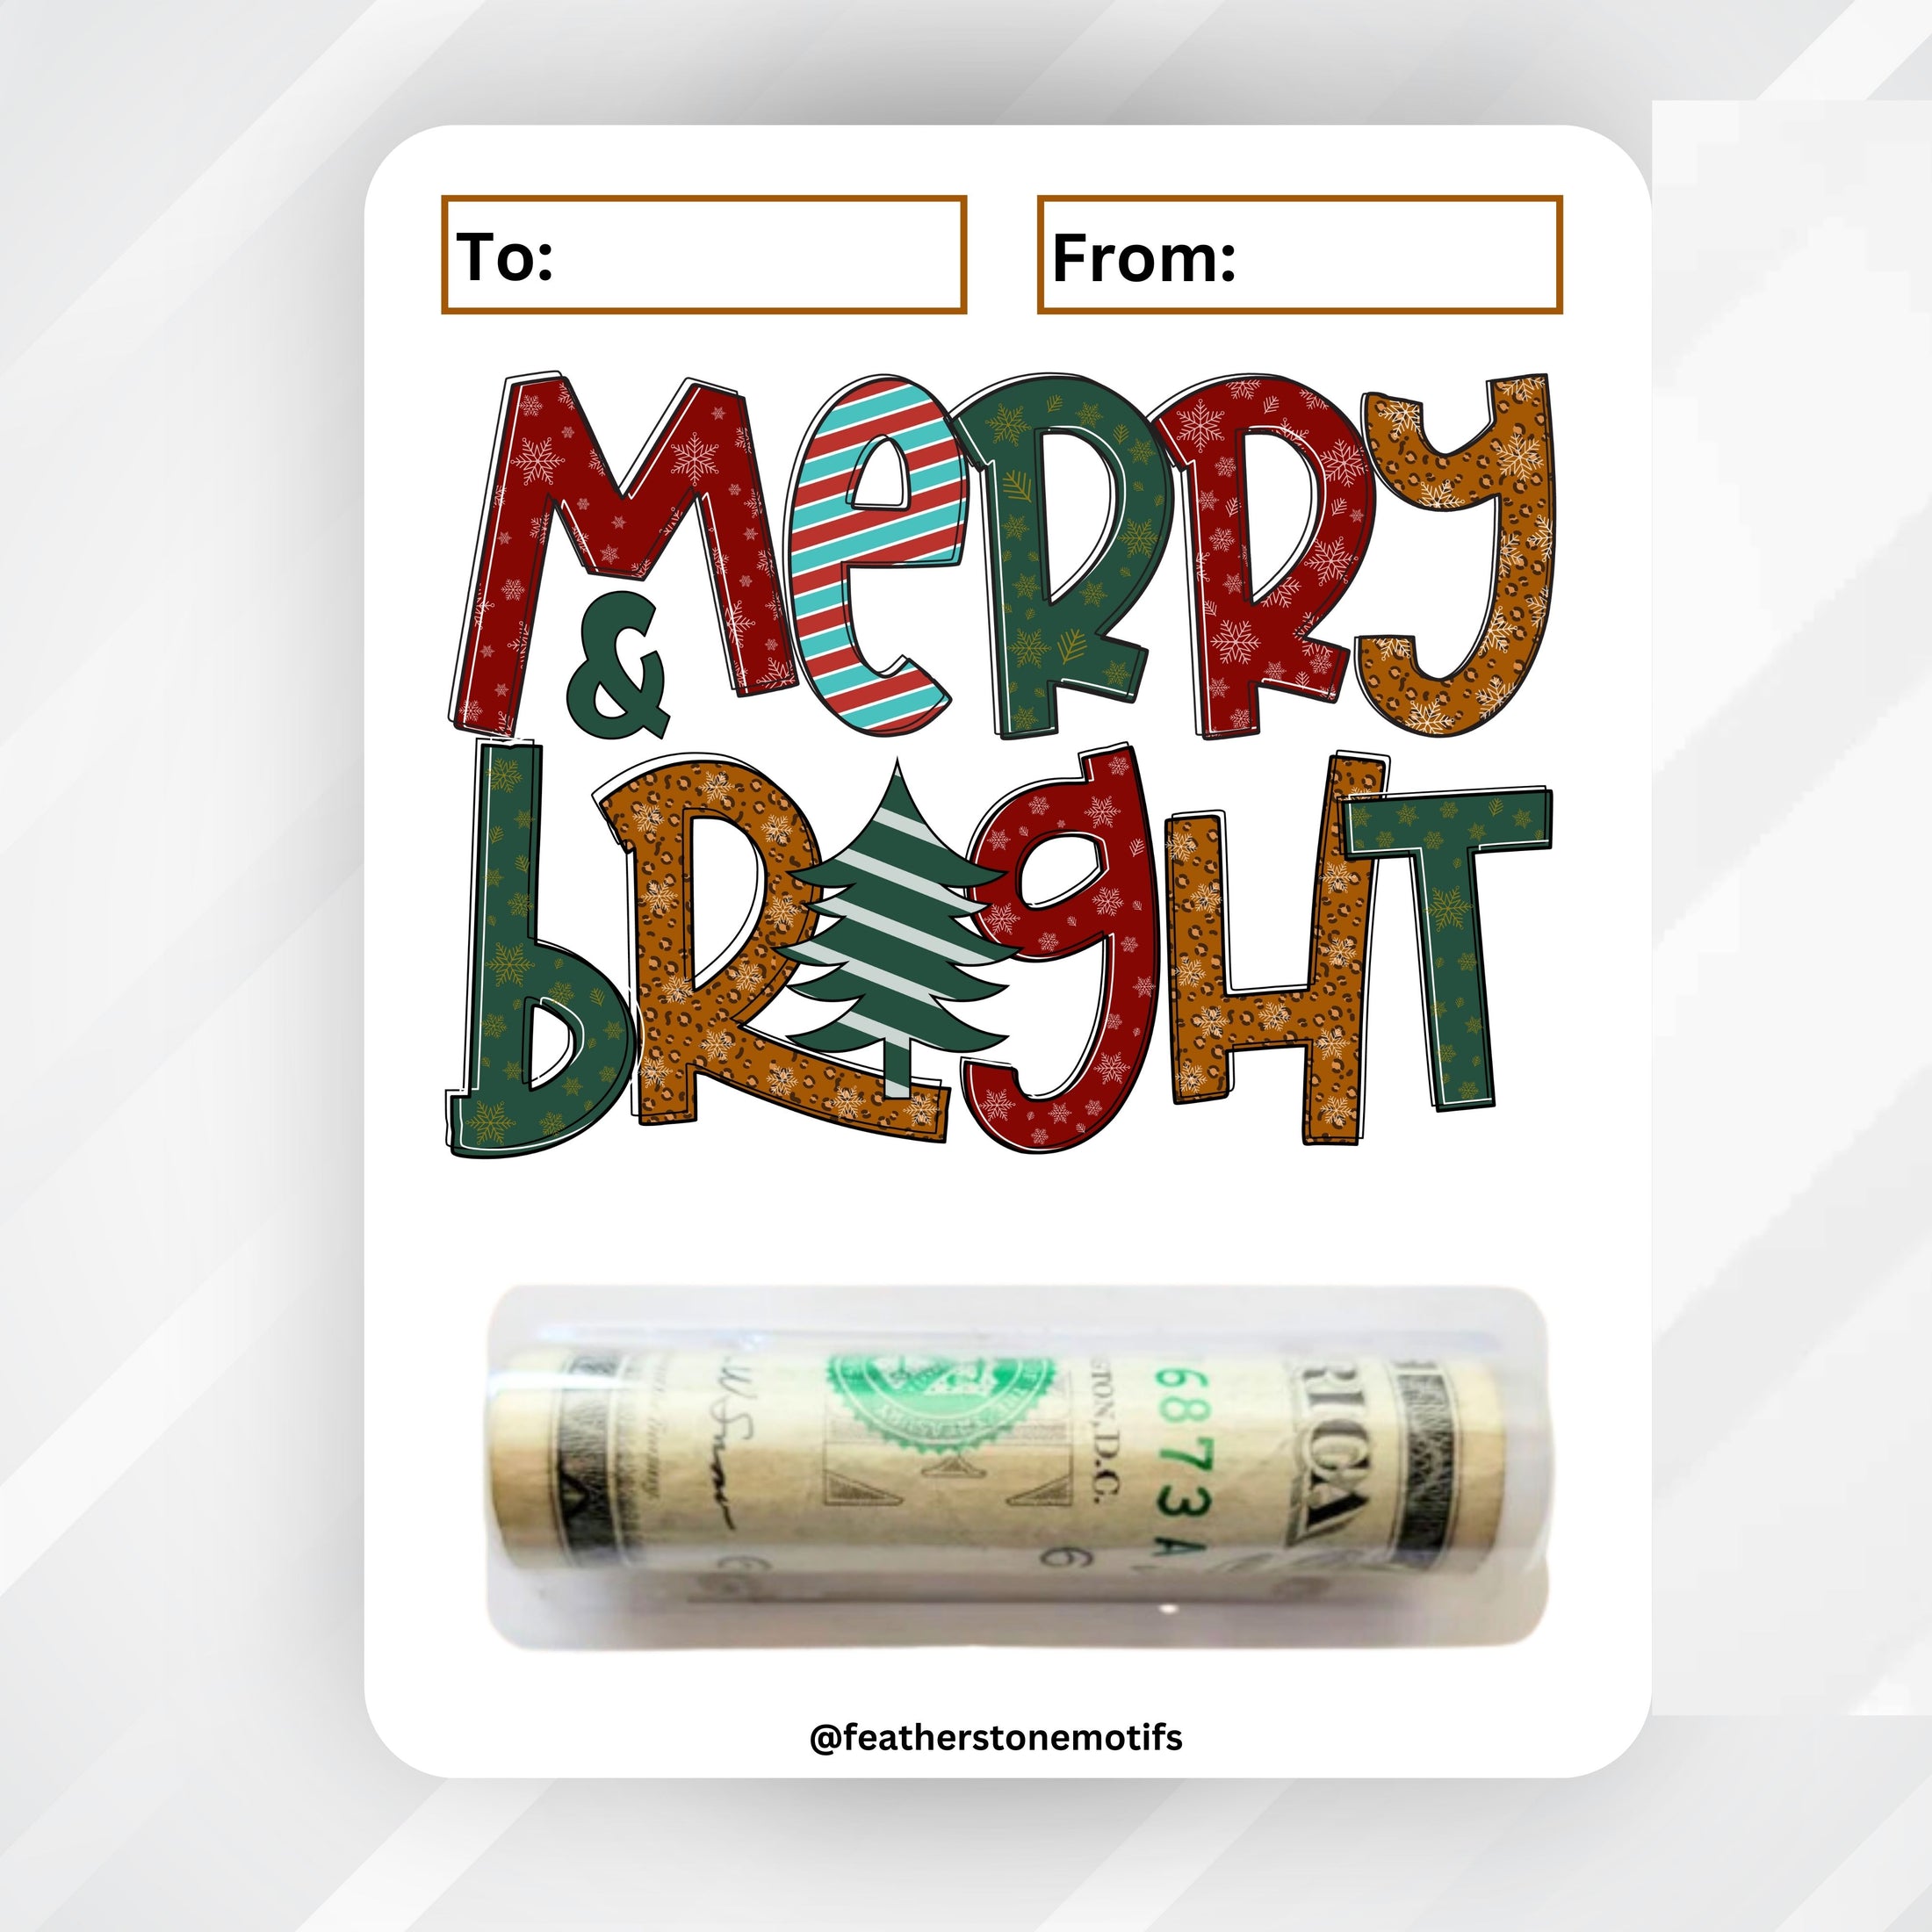 This image shows the money tube attached to the Merry & Bright Money Card.